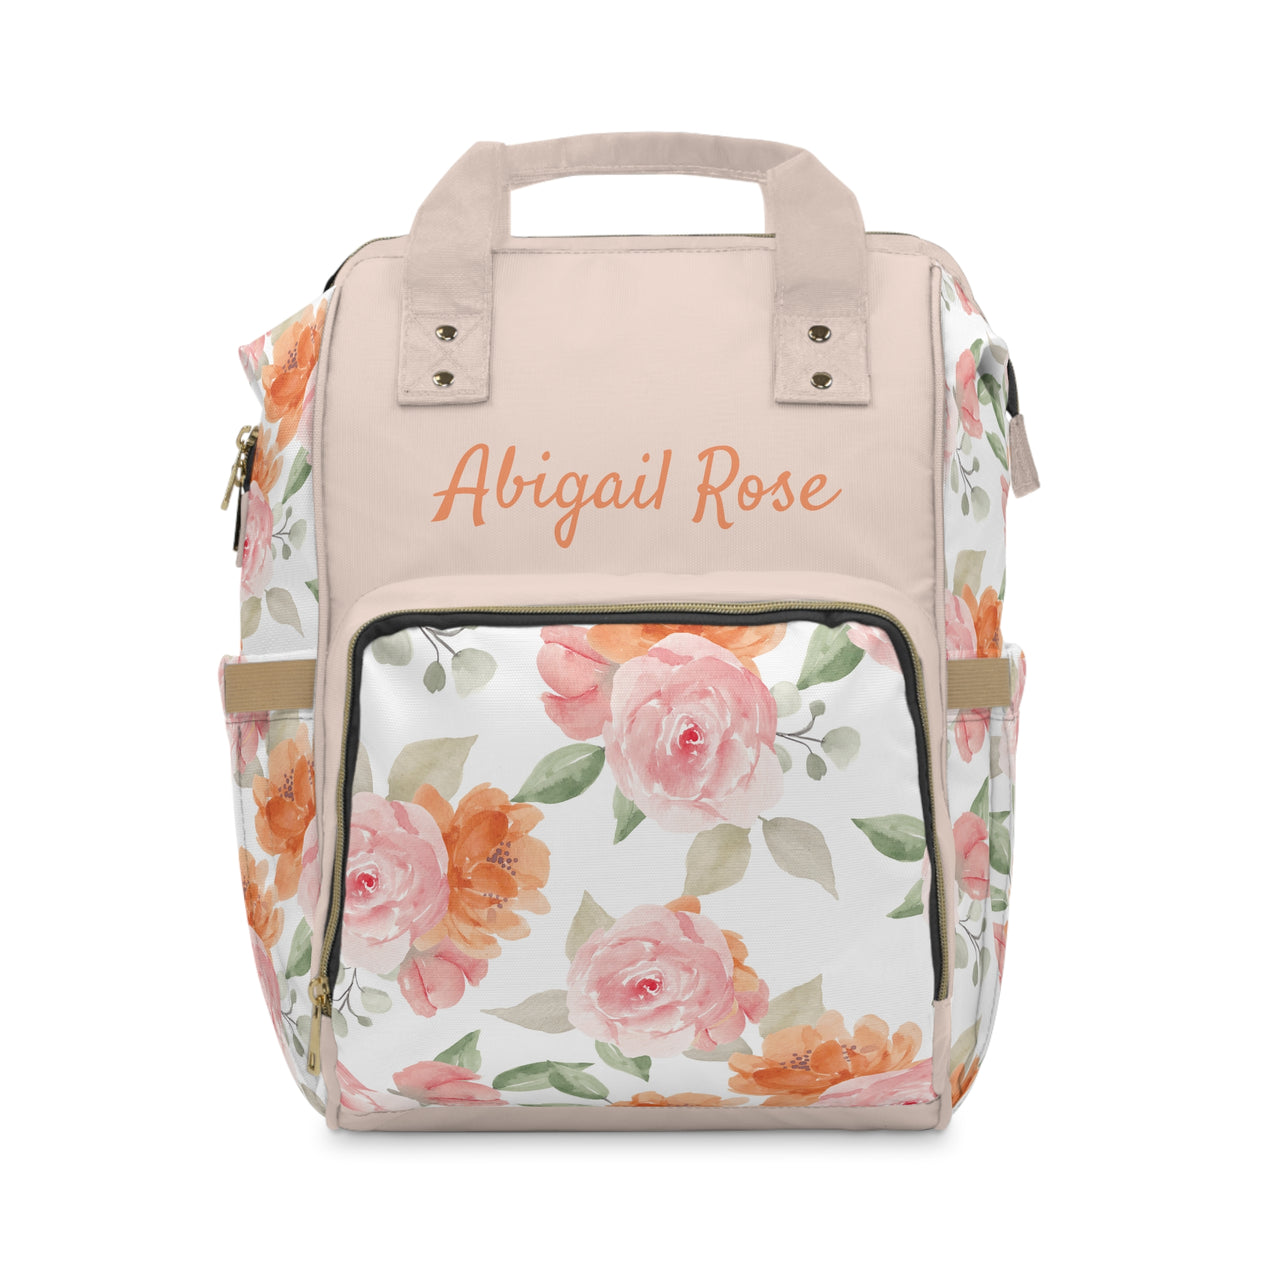 Personalized Girls Pink Rose Multifunctional Diaper Backpack, Newborn Gift, Baby Shower Gift, Baby Diaper Bag Nappy Stroller Bag